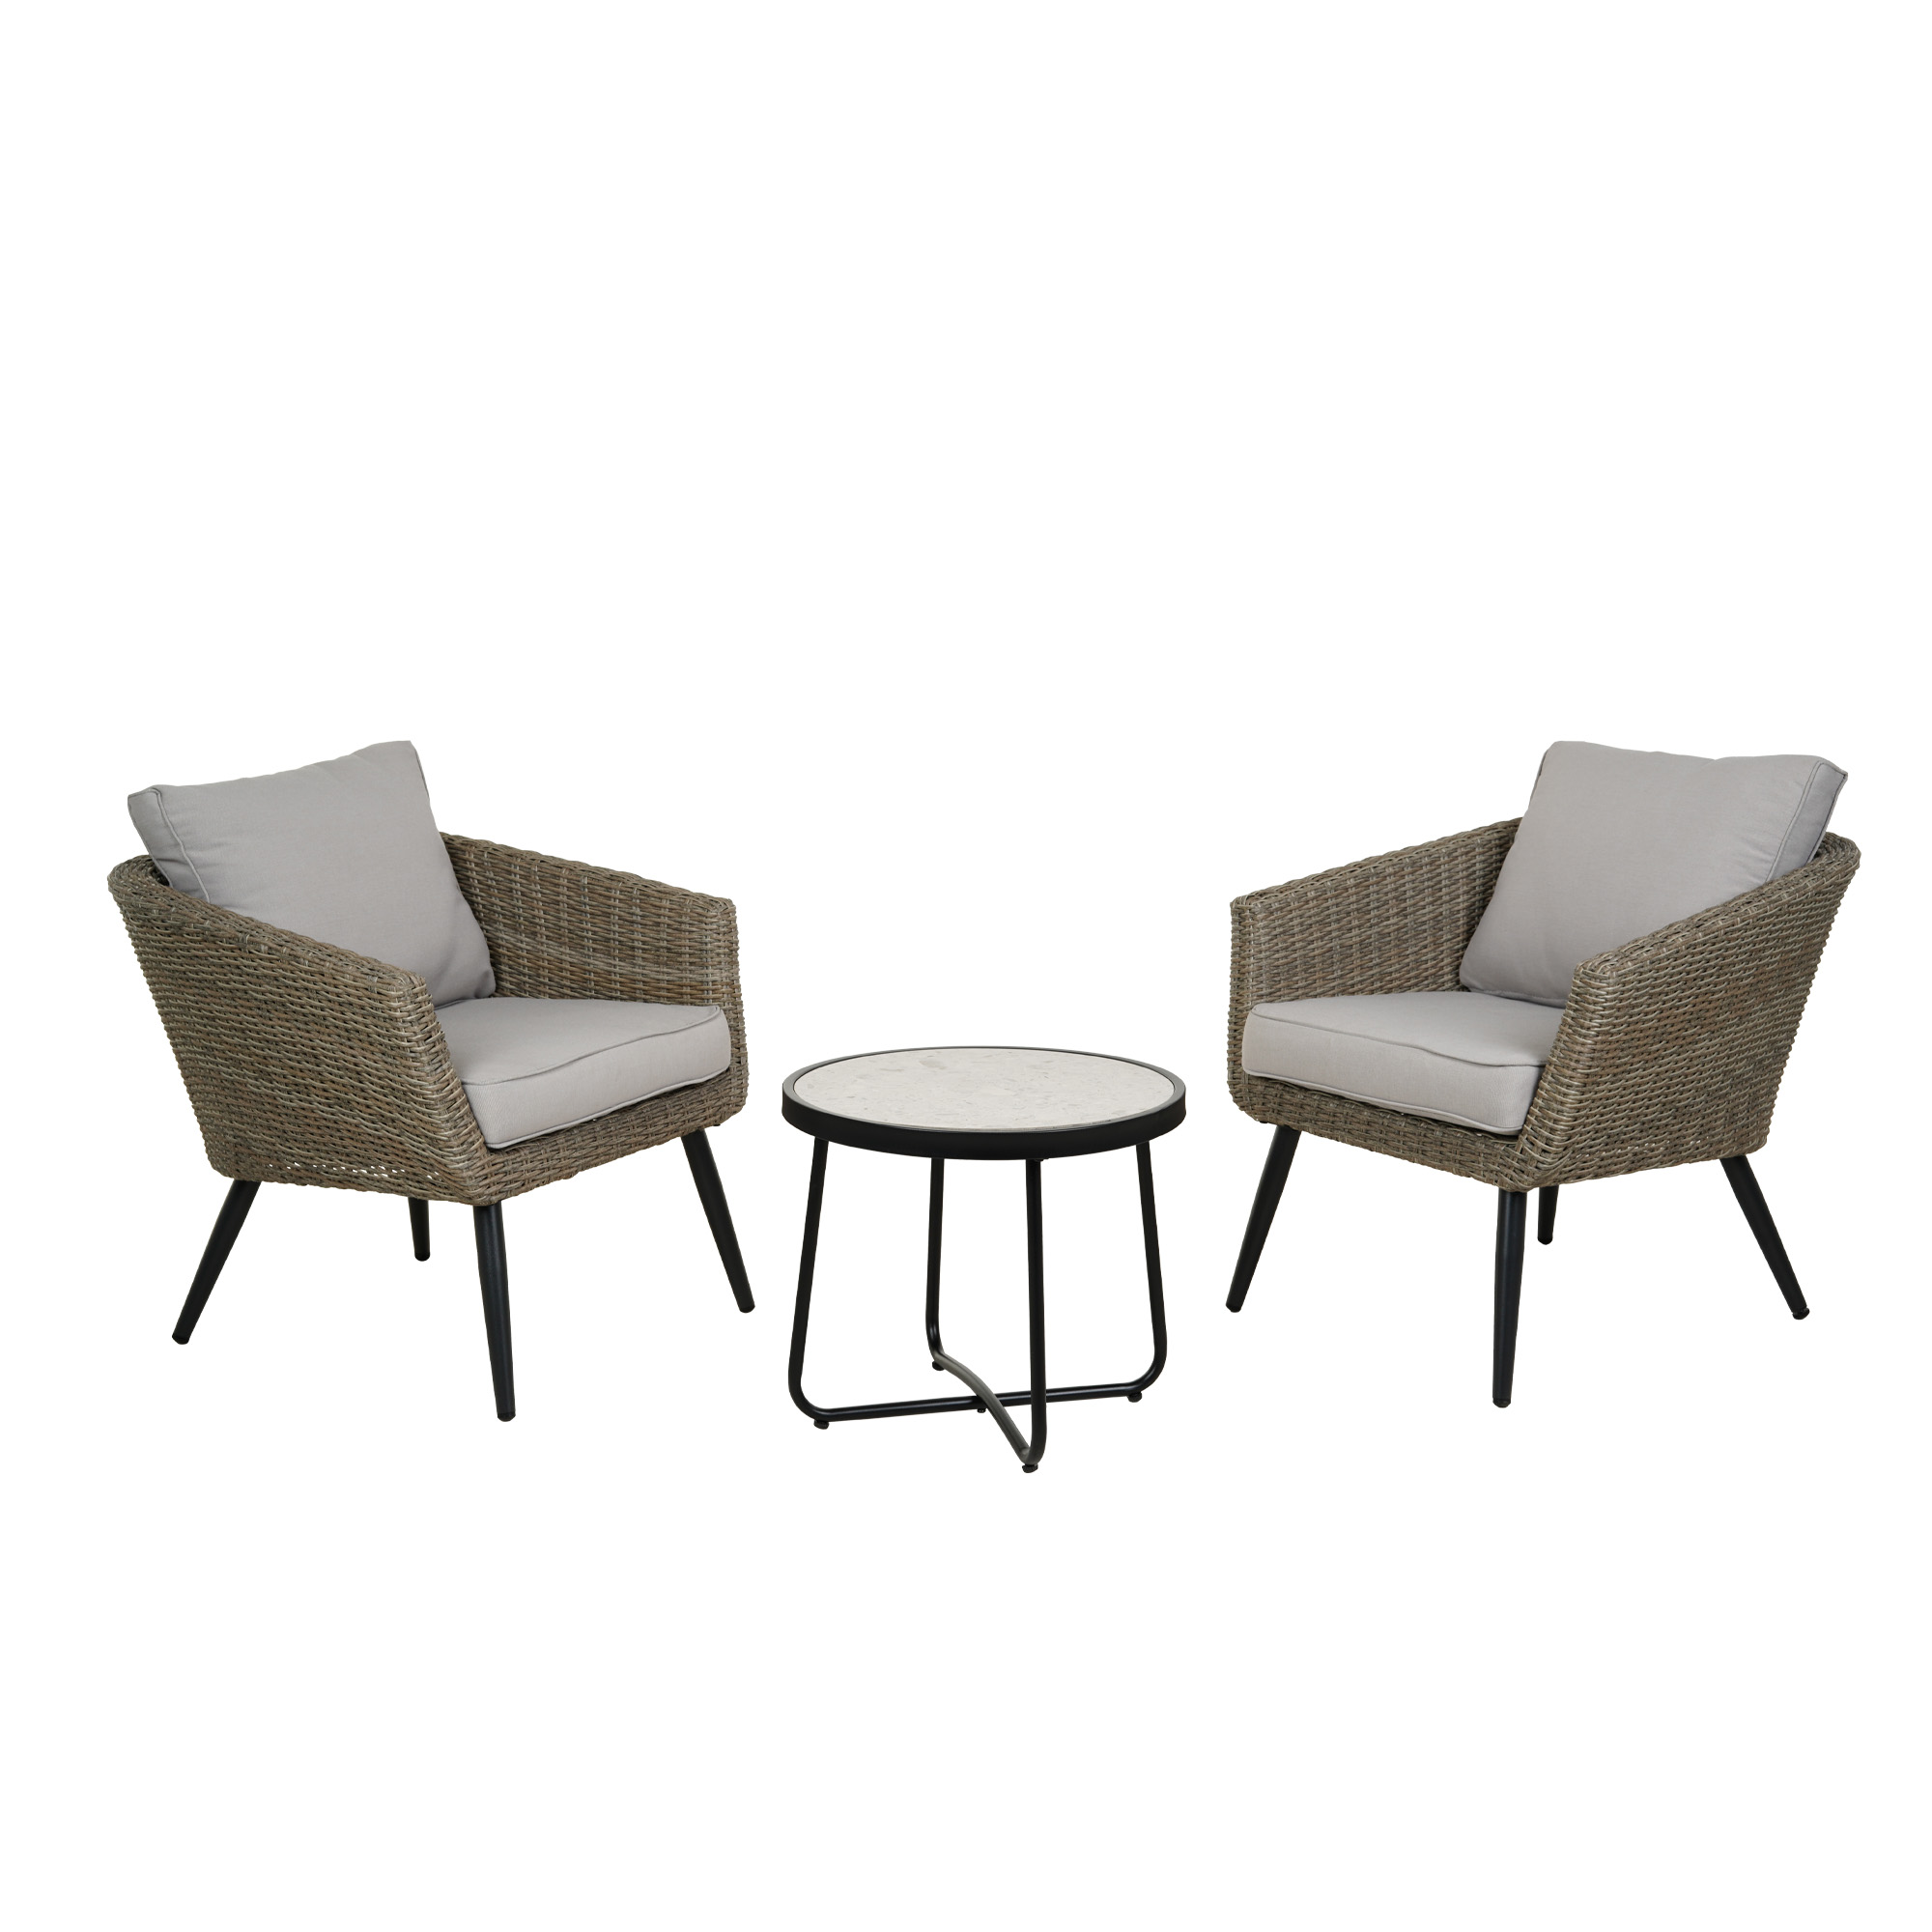 All-Aluminum Rattan Chair Chat Three-Piece Set with Cushion